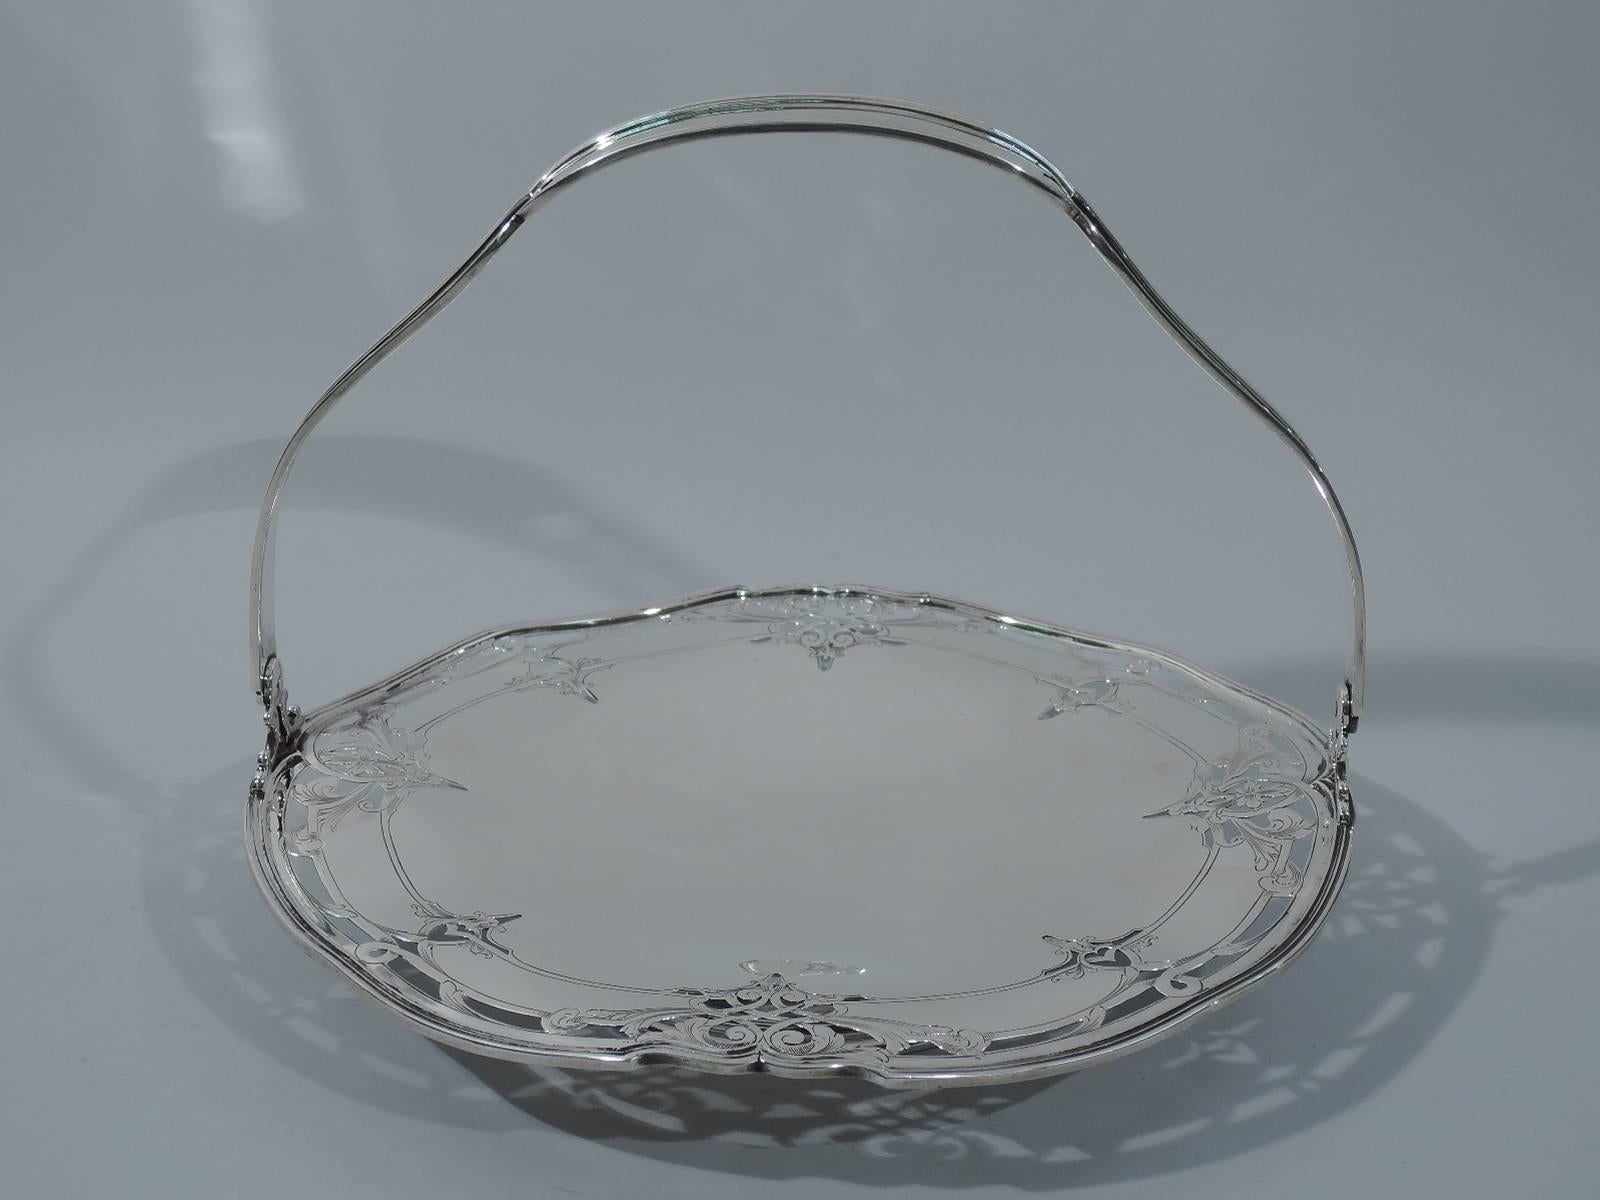 Lovely sterling silver cake plate with swing handle. Made by Reed & Barton in Taunton, circa 1920. Undulating and reeded rim with scrolls and pierced ornament. Plain well for showing off special treats. C-scroll handle is reeded with concave sides,